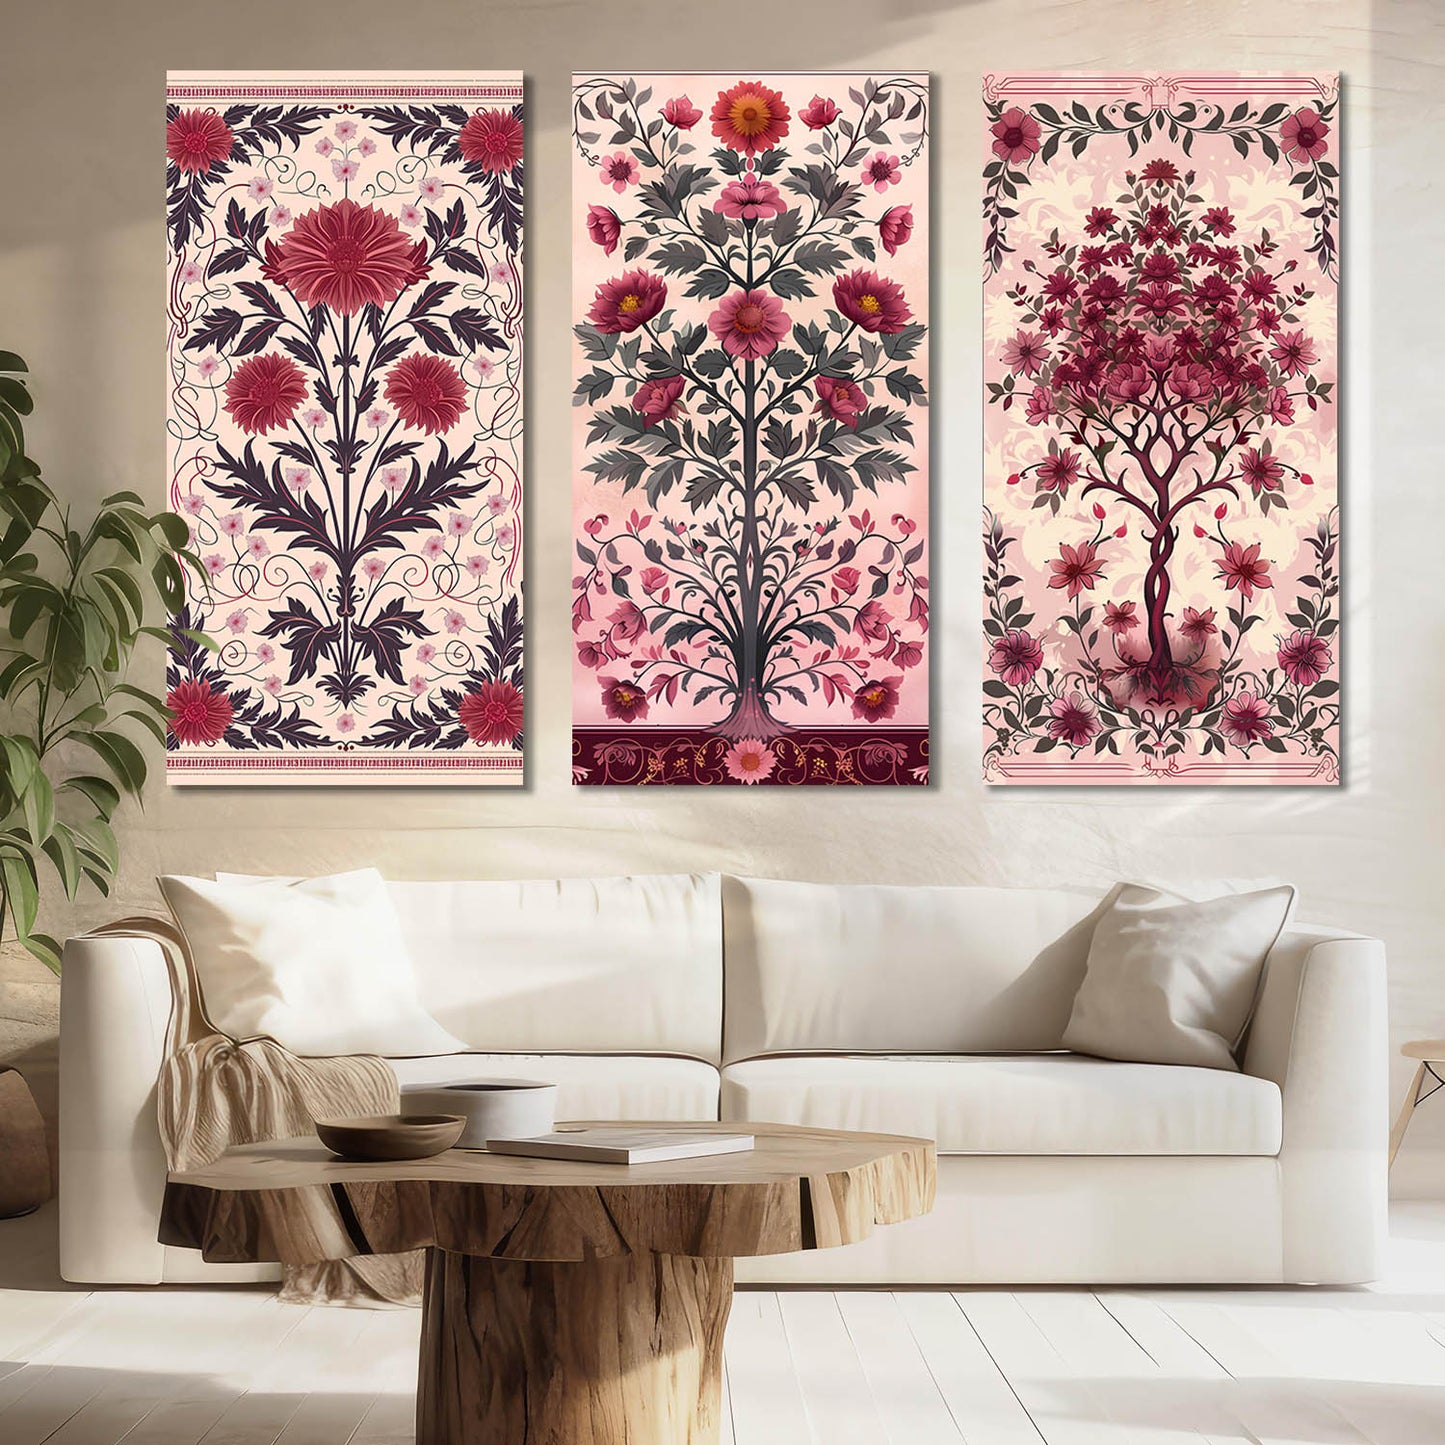 Traditional Wall Art Canvas, Wall Print for Living Room Wall Decoration